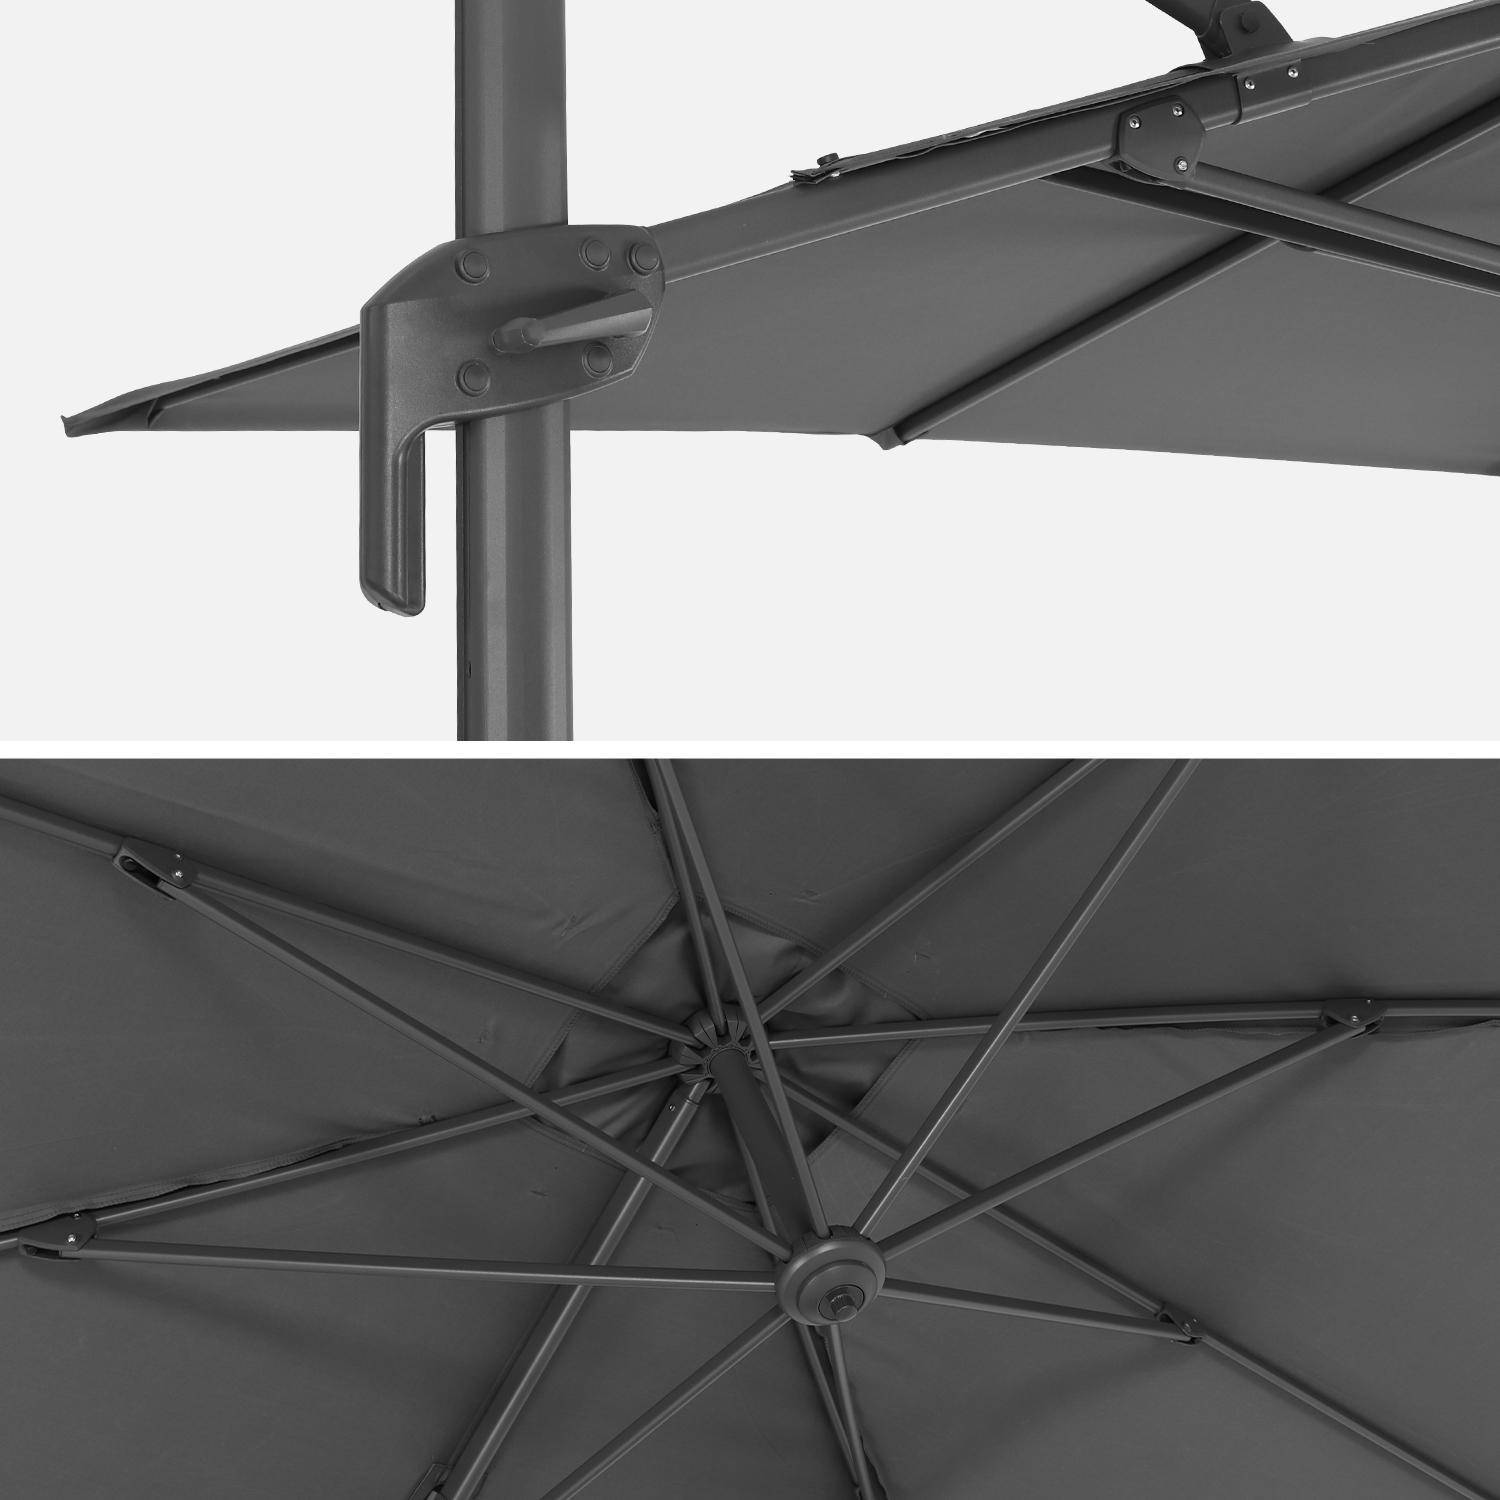 2x3m rectangular cantilever paraso - parasol can be tilted, folded and rotated 360 degreesl - Antibes - Grey,sweeek,Photo7